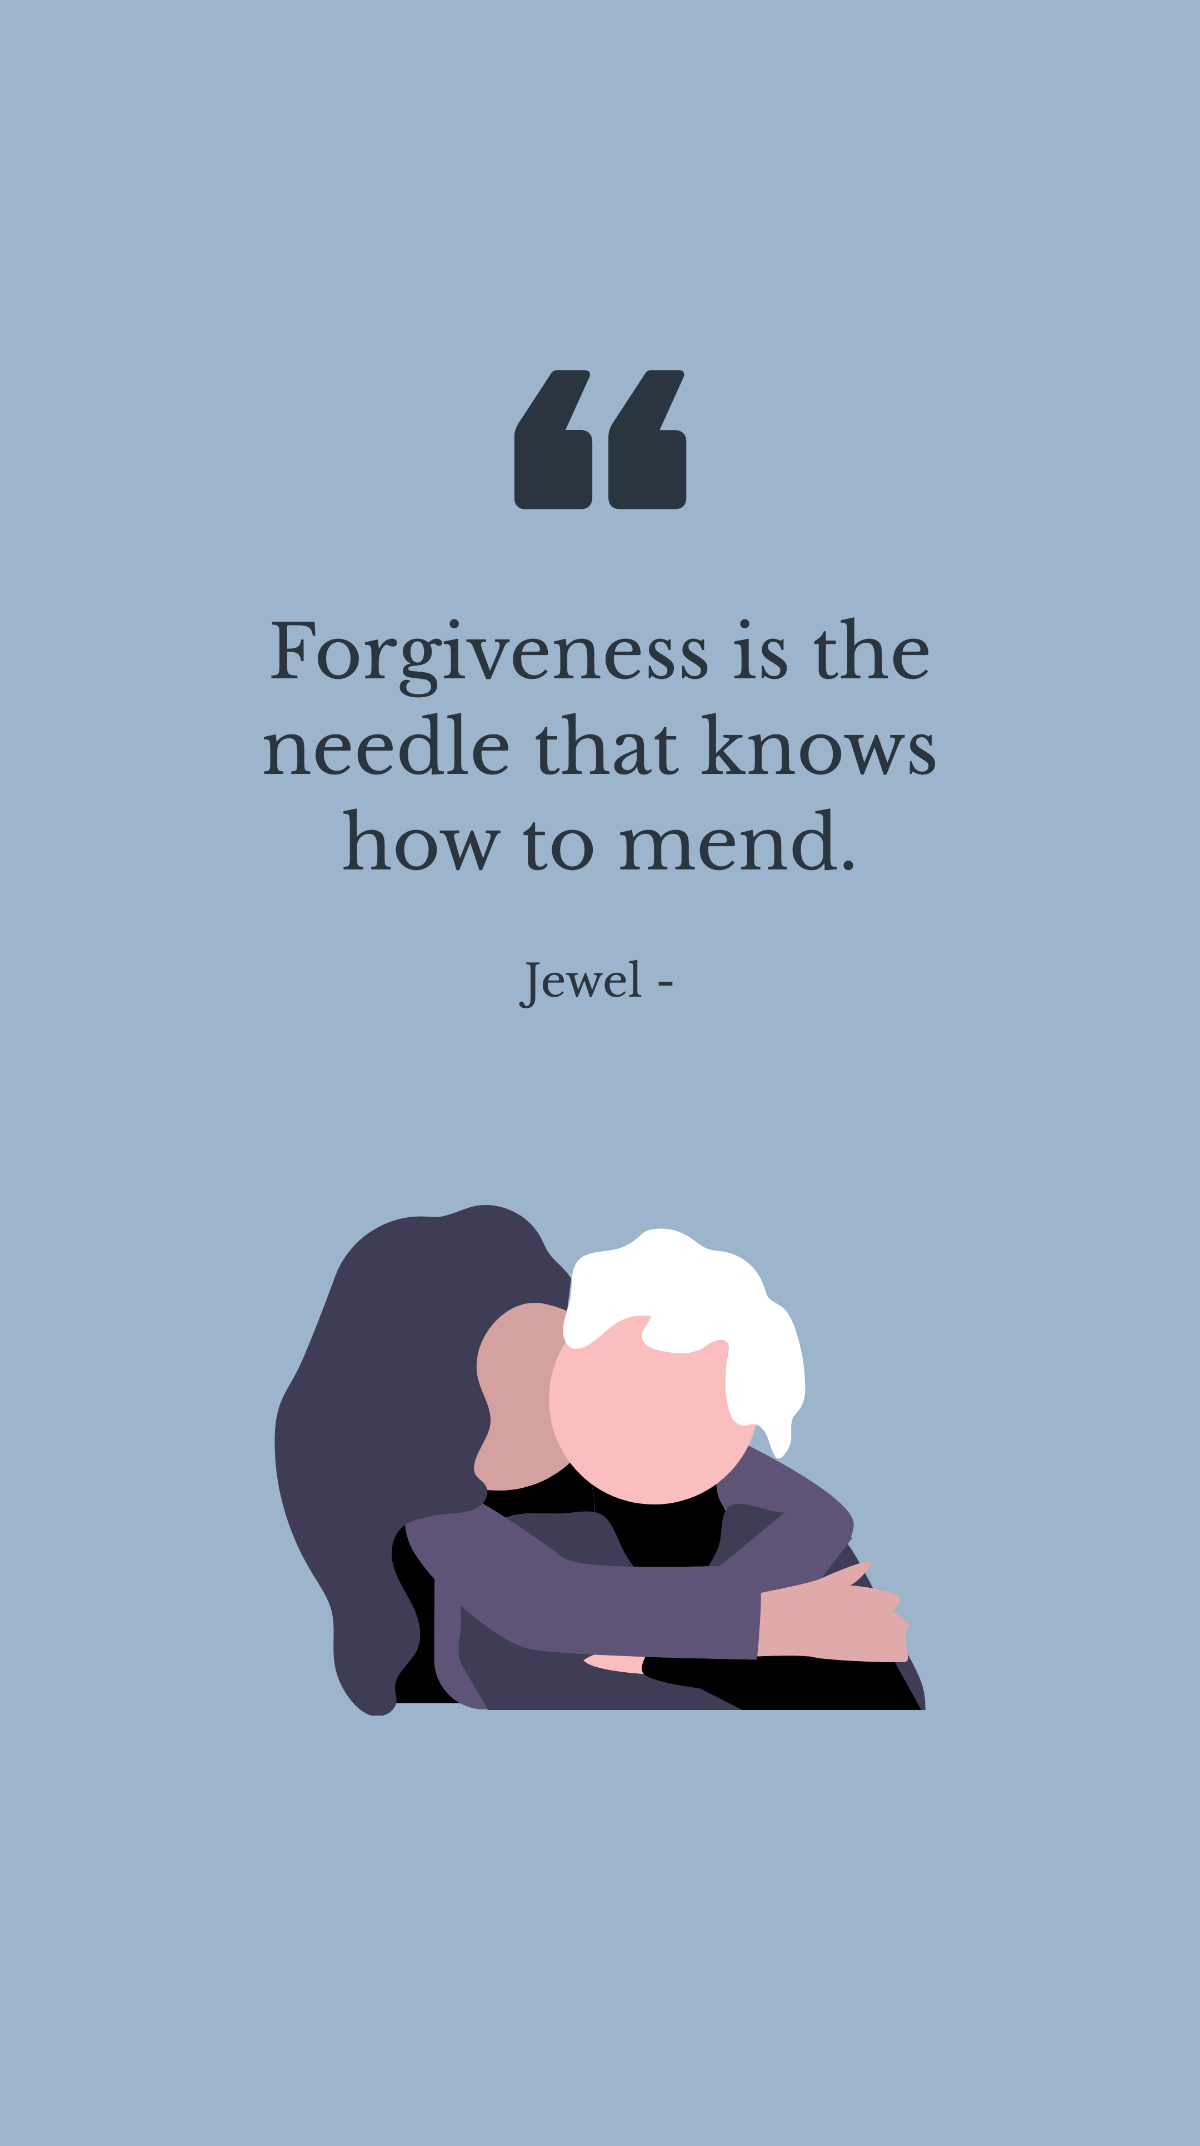 Jewel - Forgiveness is the needle that knows how to mend. Template